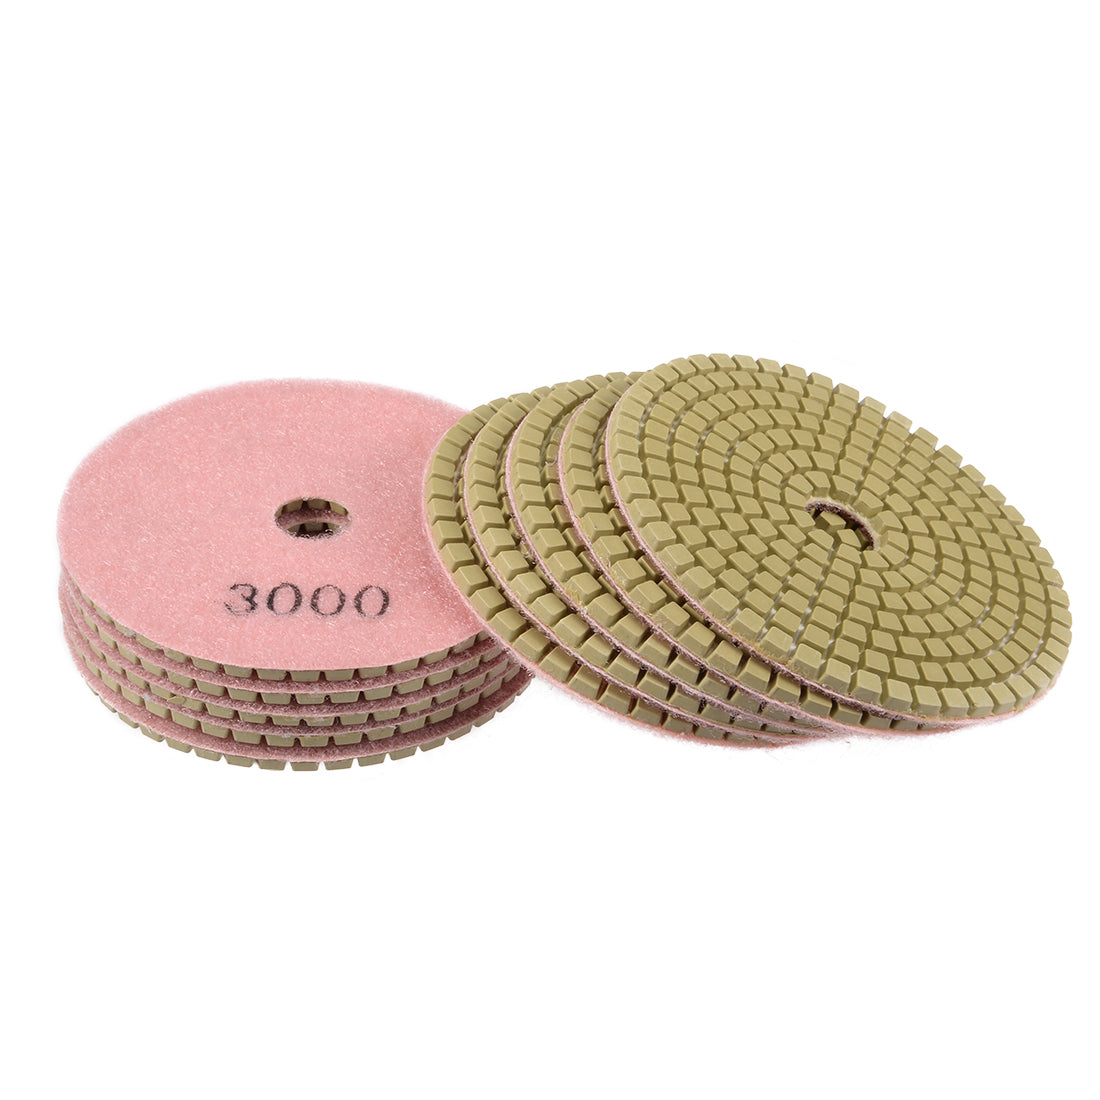 uxcell Uxcell Diamond Polishing Sanding Grinding Pads Discs 4 Inch Grit 3000 10 Pcs for Granite Concrete Stone Marble